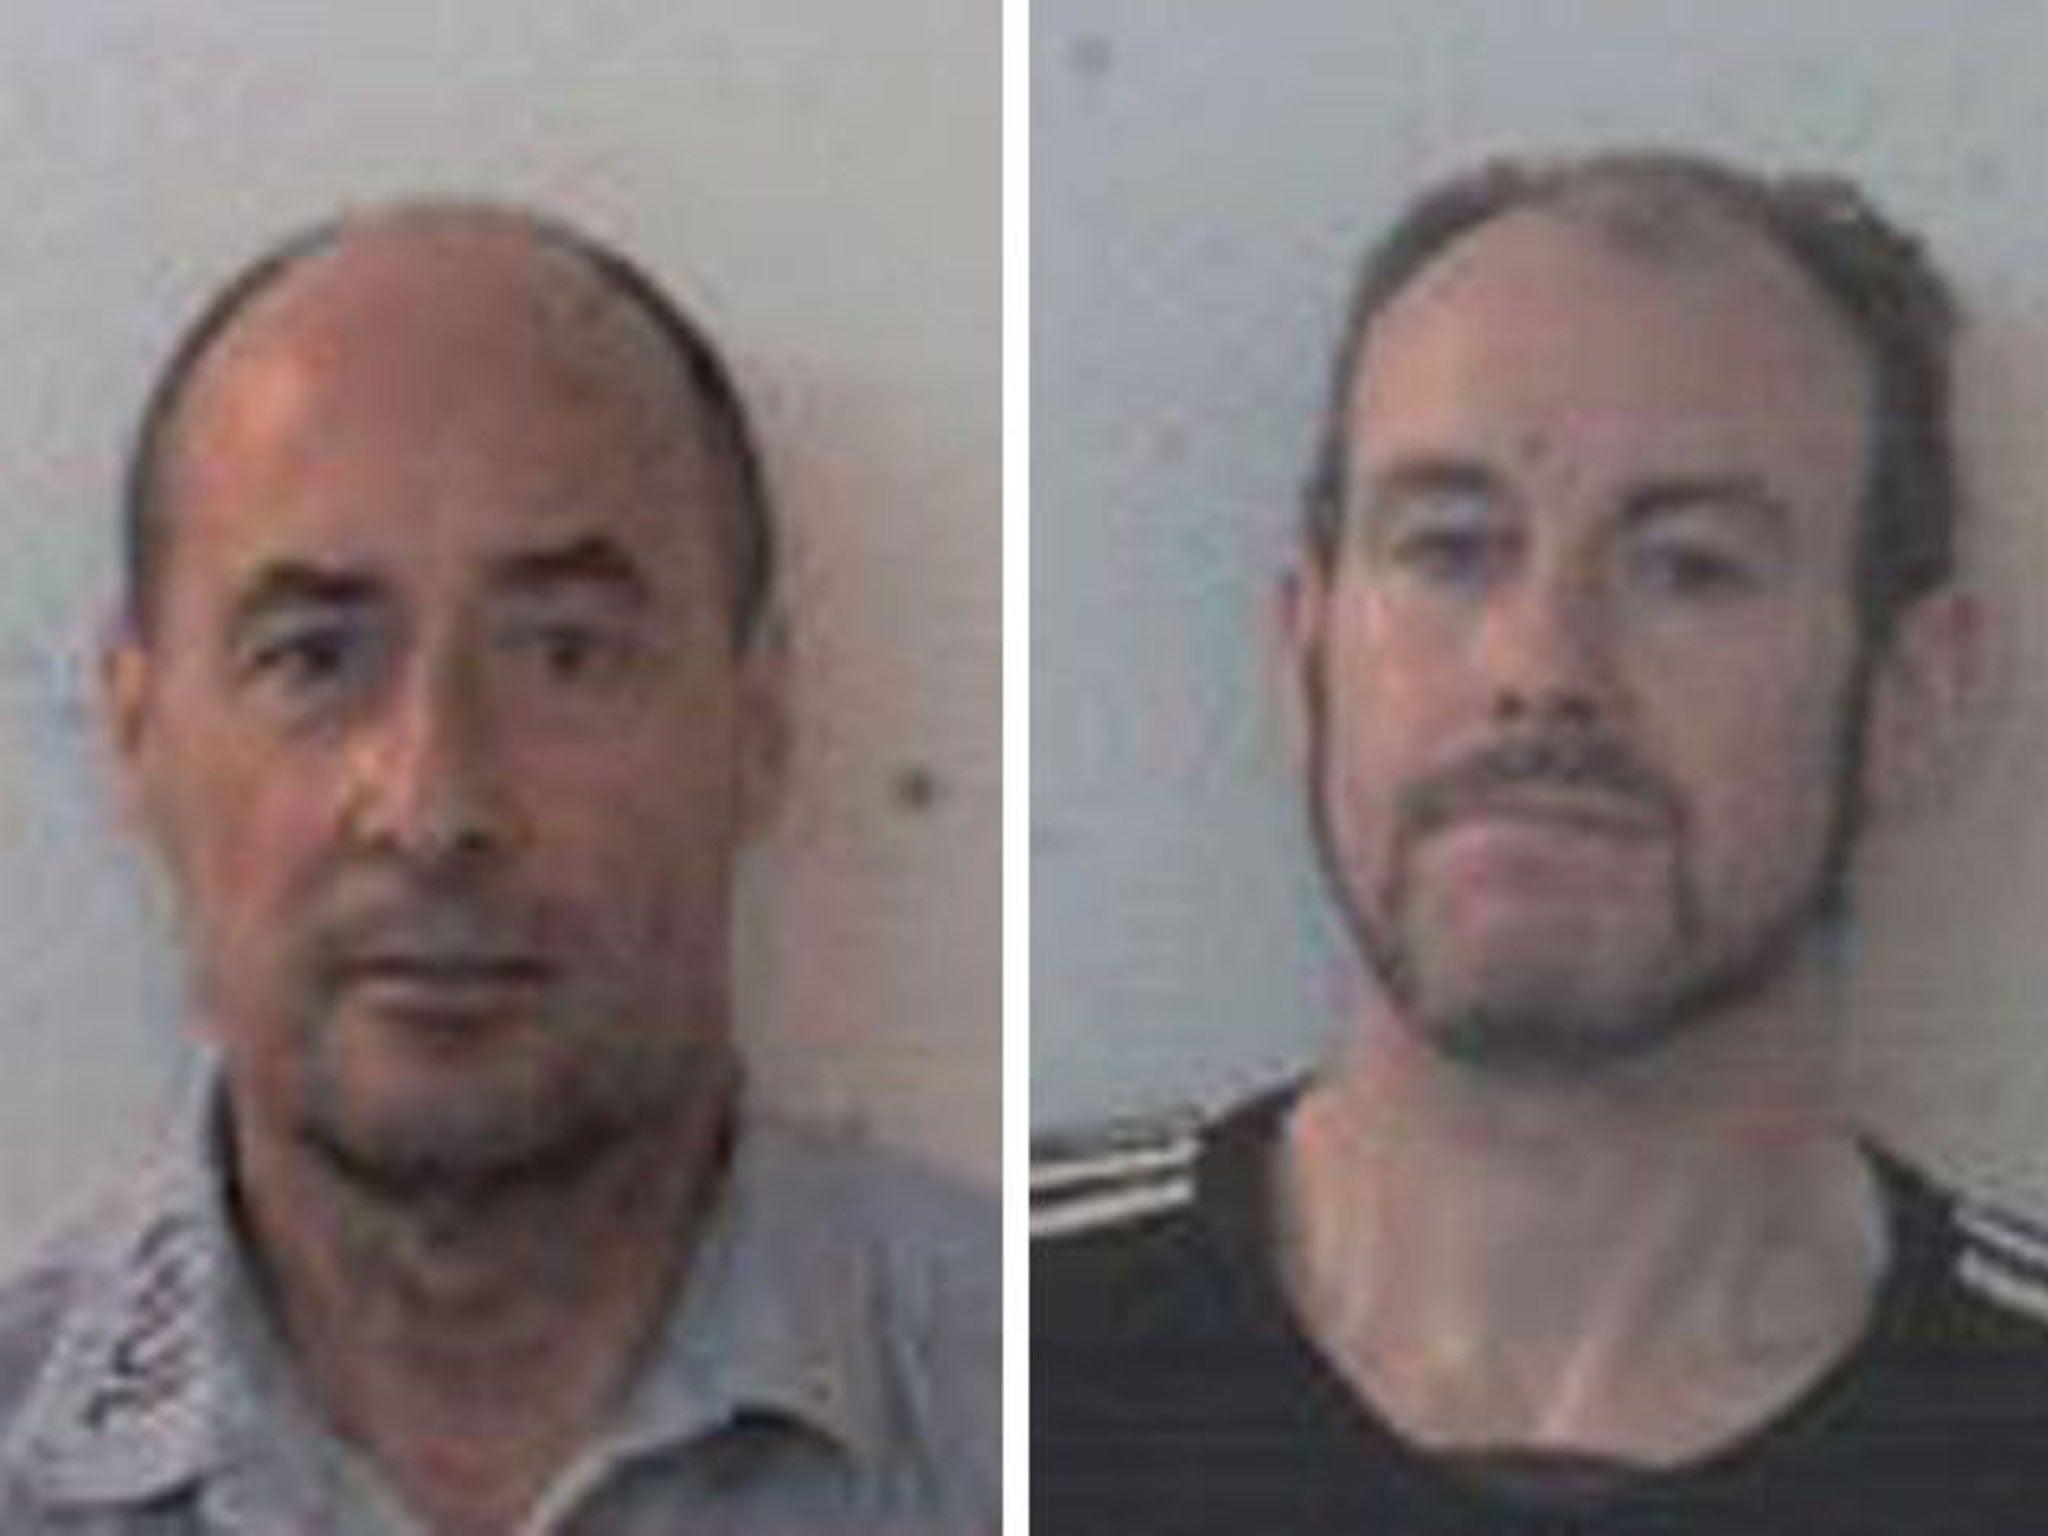 Anthony Marsh (left) and Lee Davis (right), both admit to grooming vulnerable adolescent boys online before sexually abusing them